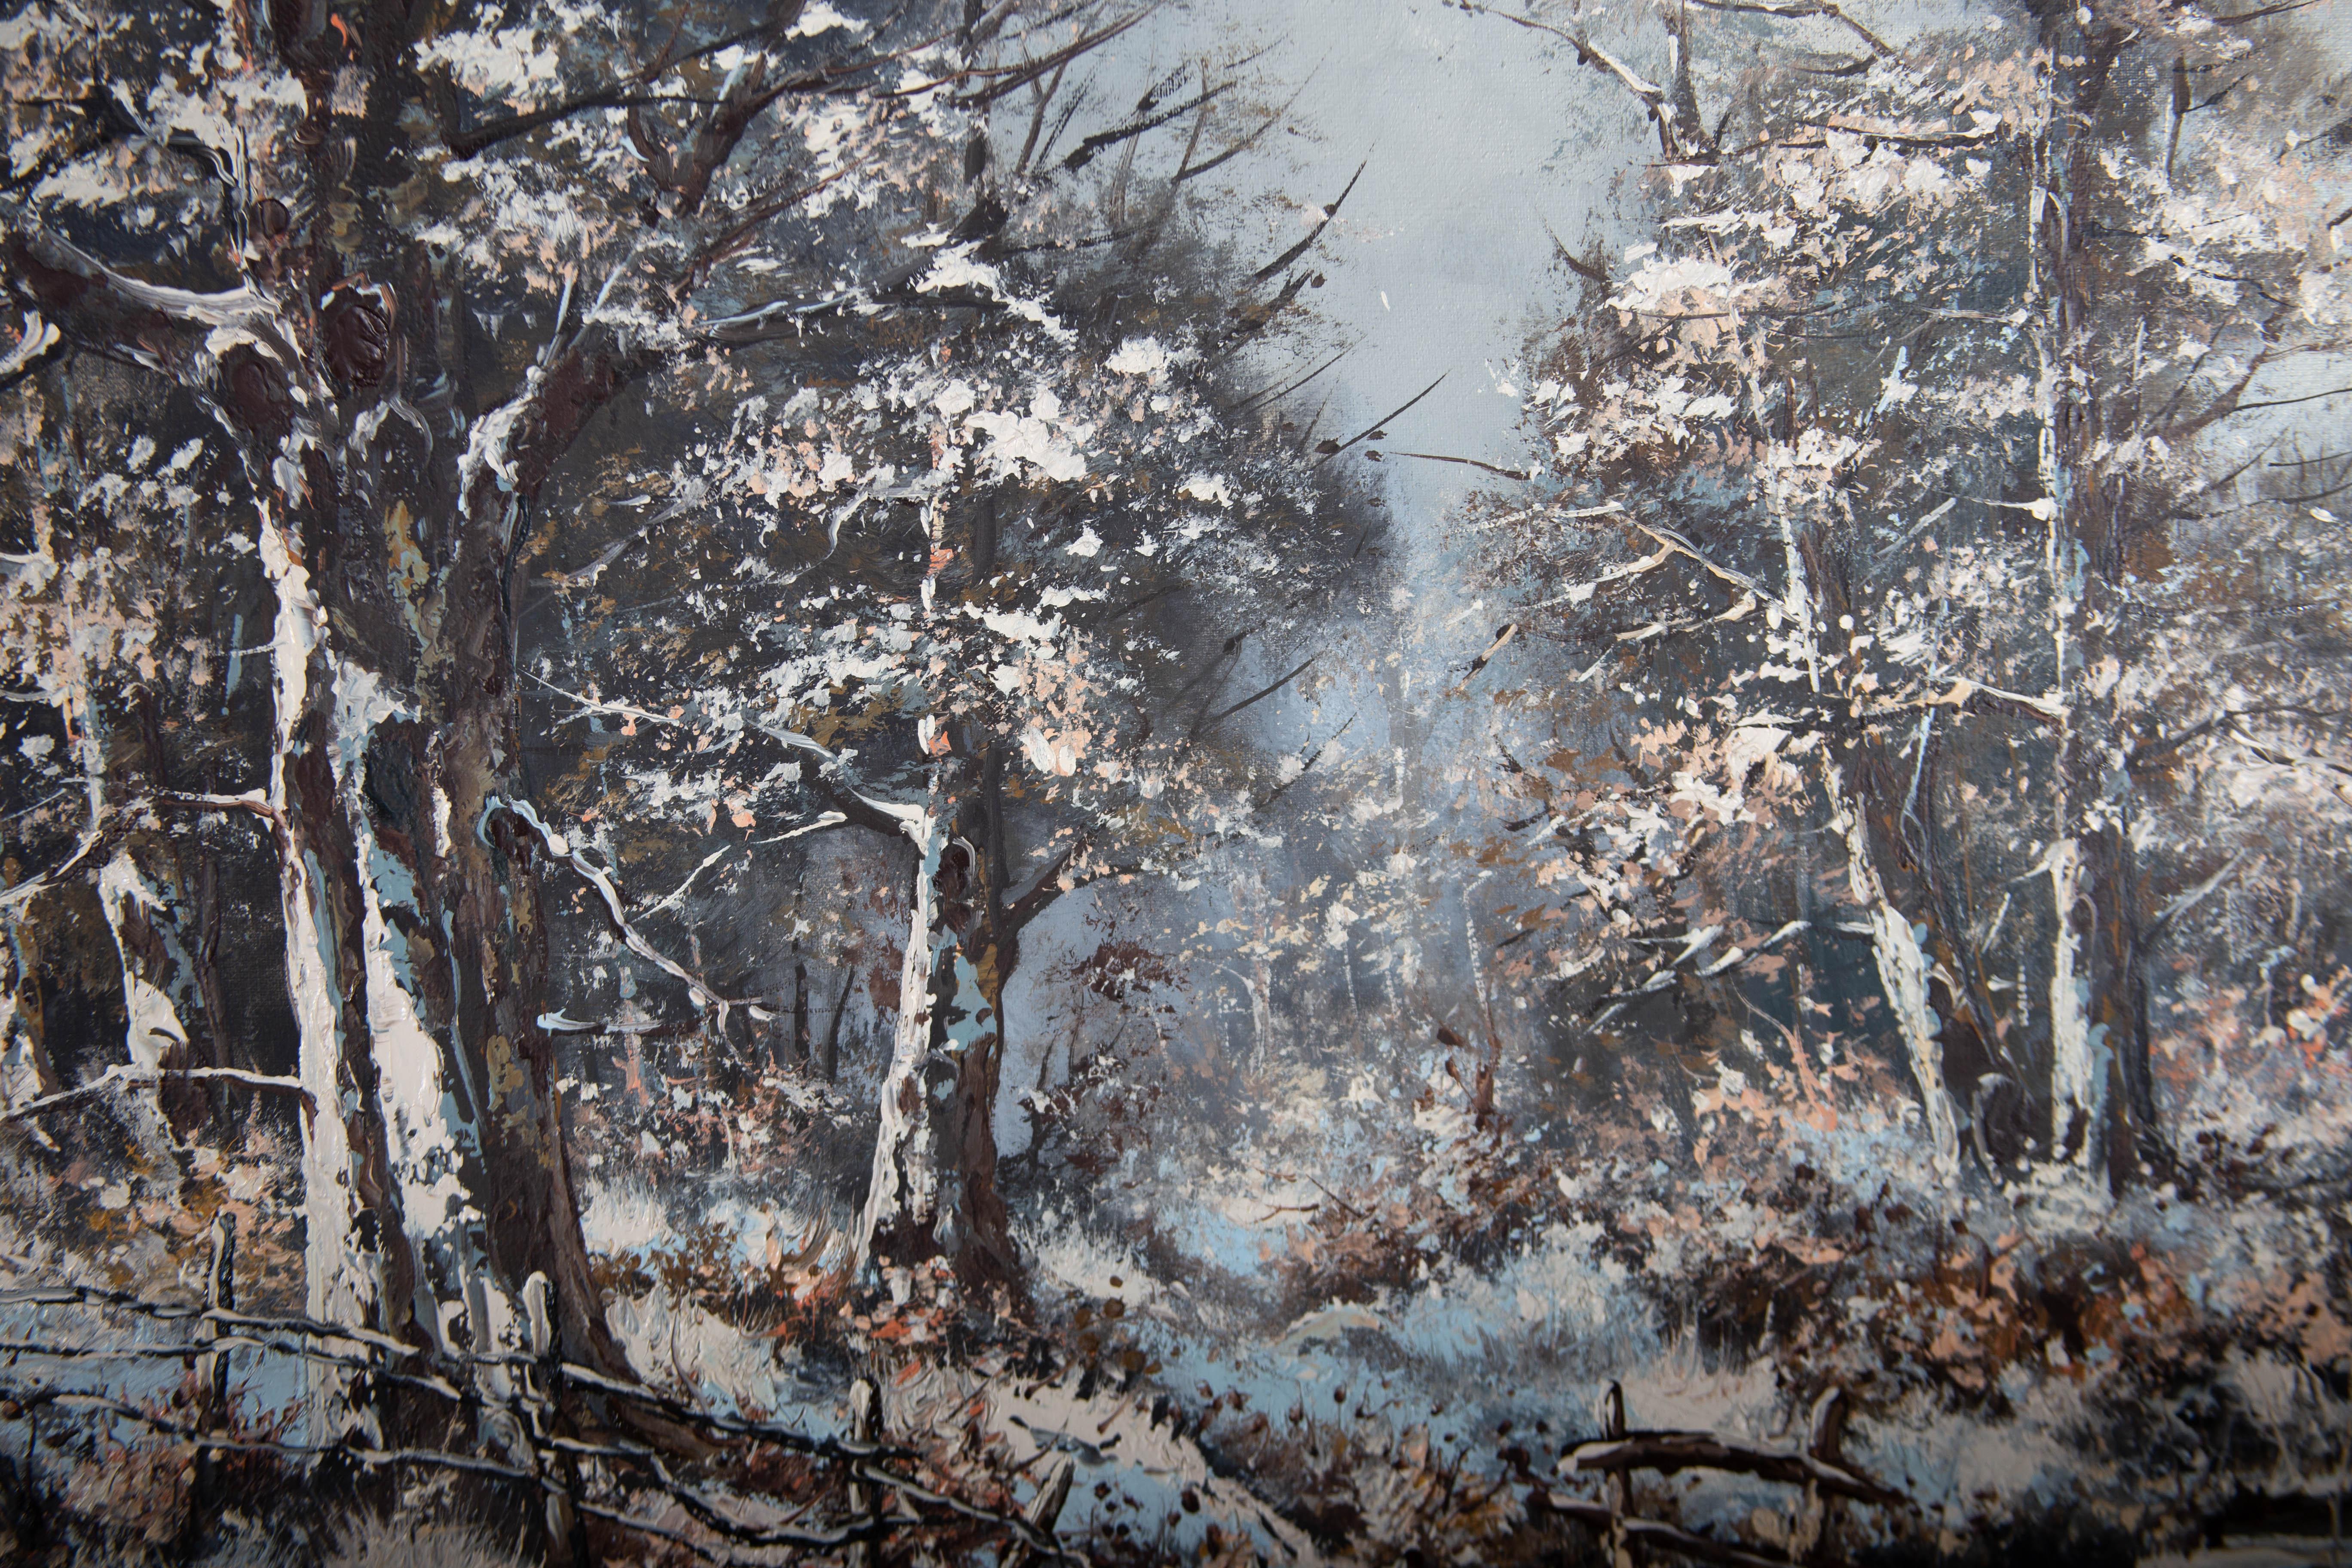 A snowy landscape of trees by a river. Presented in an ornate pierced gilt-effect frame. Signed to the lower-right edge. On canvas on stretchers.
